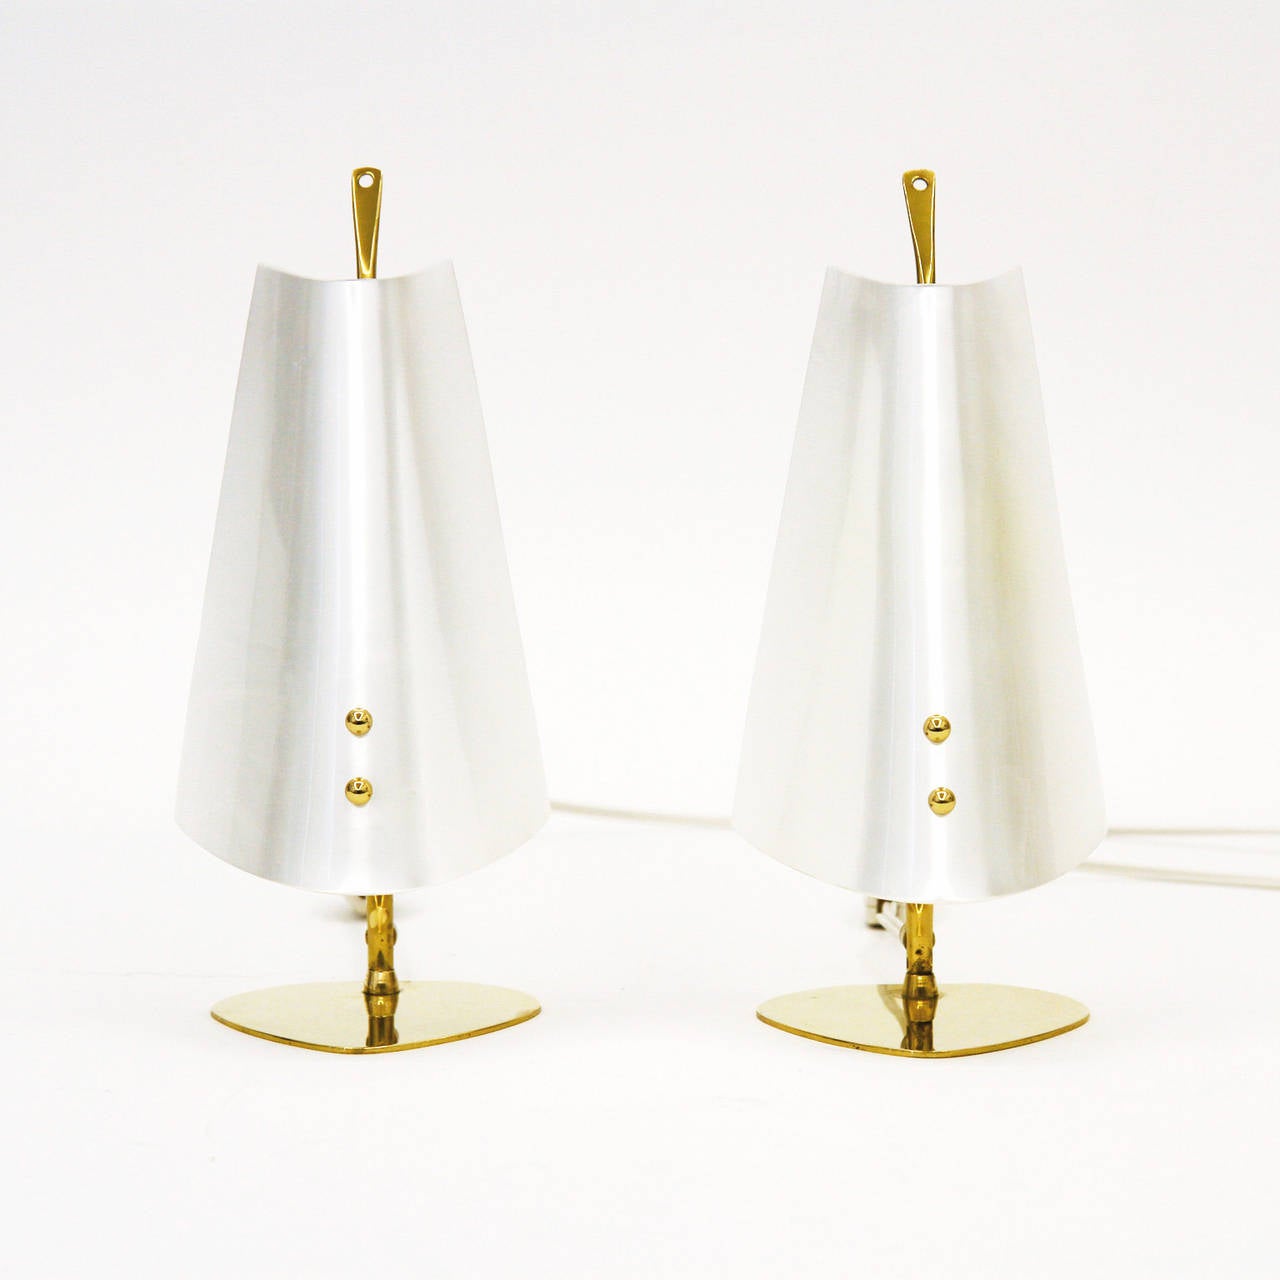 Lovely pair of table or bedside lamps in brass with mother-of-pearl perspex shades. Terrific stylish mood lights in very good original condition. One candelabra size E14 bulb per lamp.